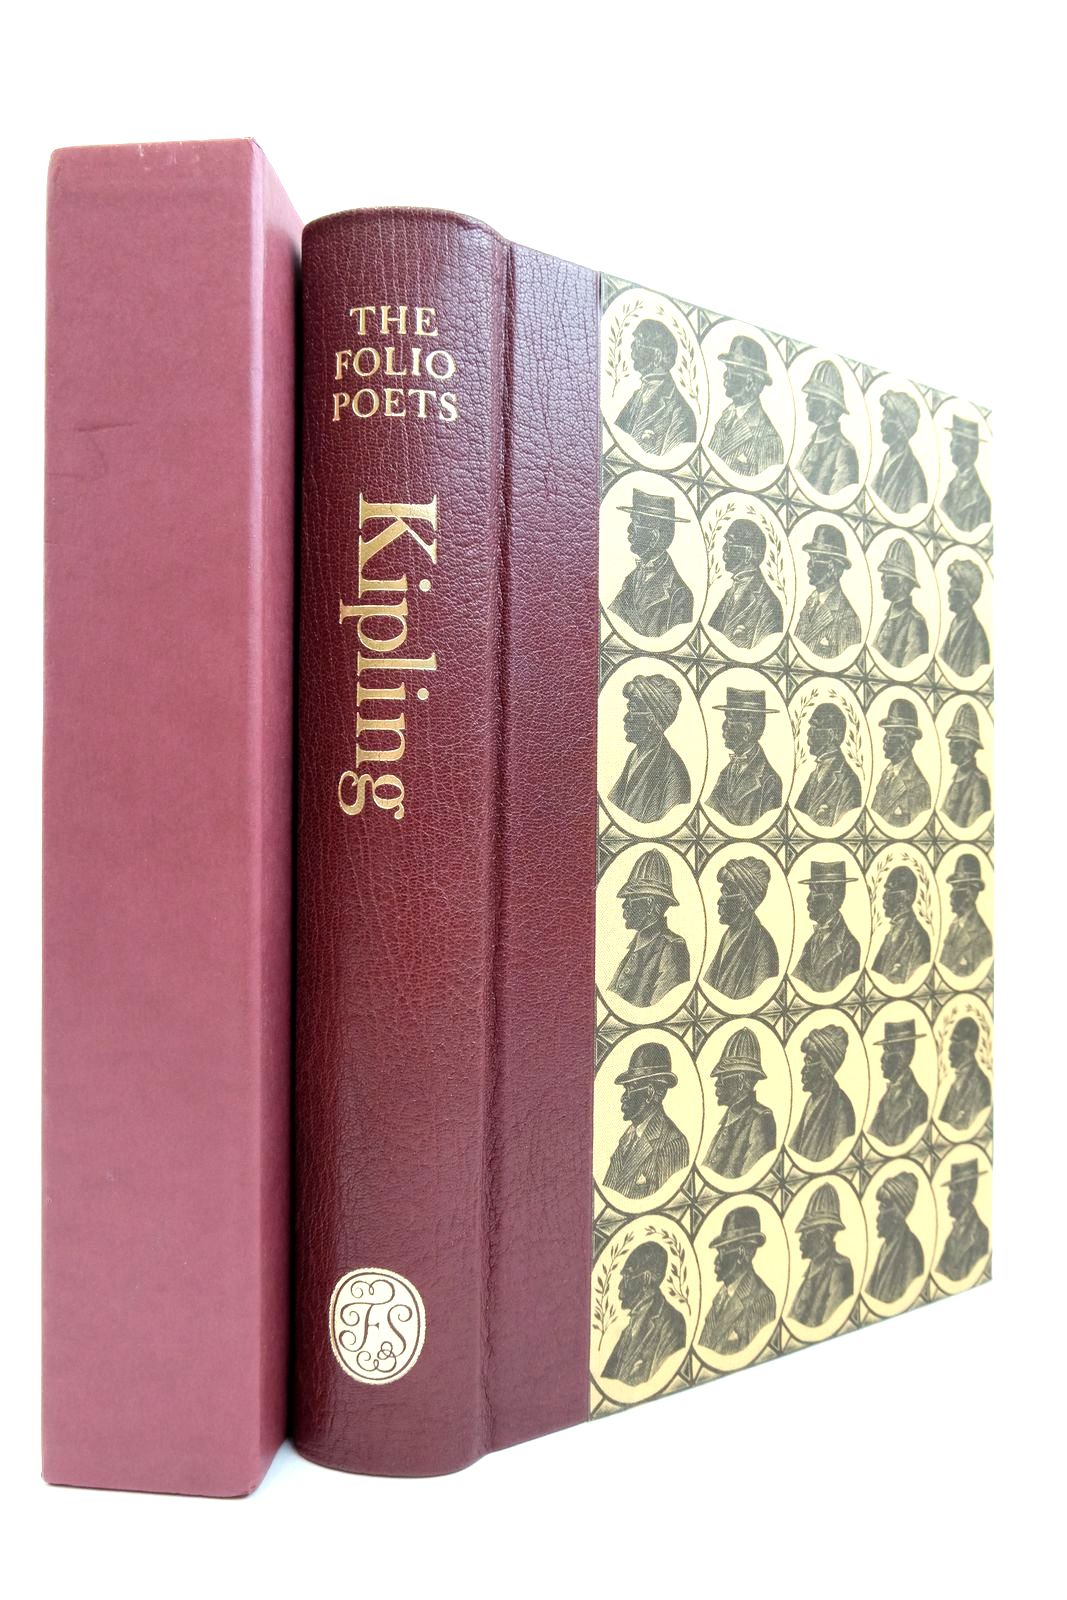 Photo of RUDYARD KIPLING SELECTED POEMS (THE FOLIO POETS) written by Kipling, Rudyard Lycett, Andrew illustrated by Tute, George published by Folio Society (STOCK CODE: 2139450)  for sale by Stella & Rose's Books